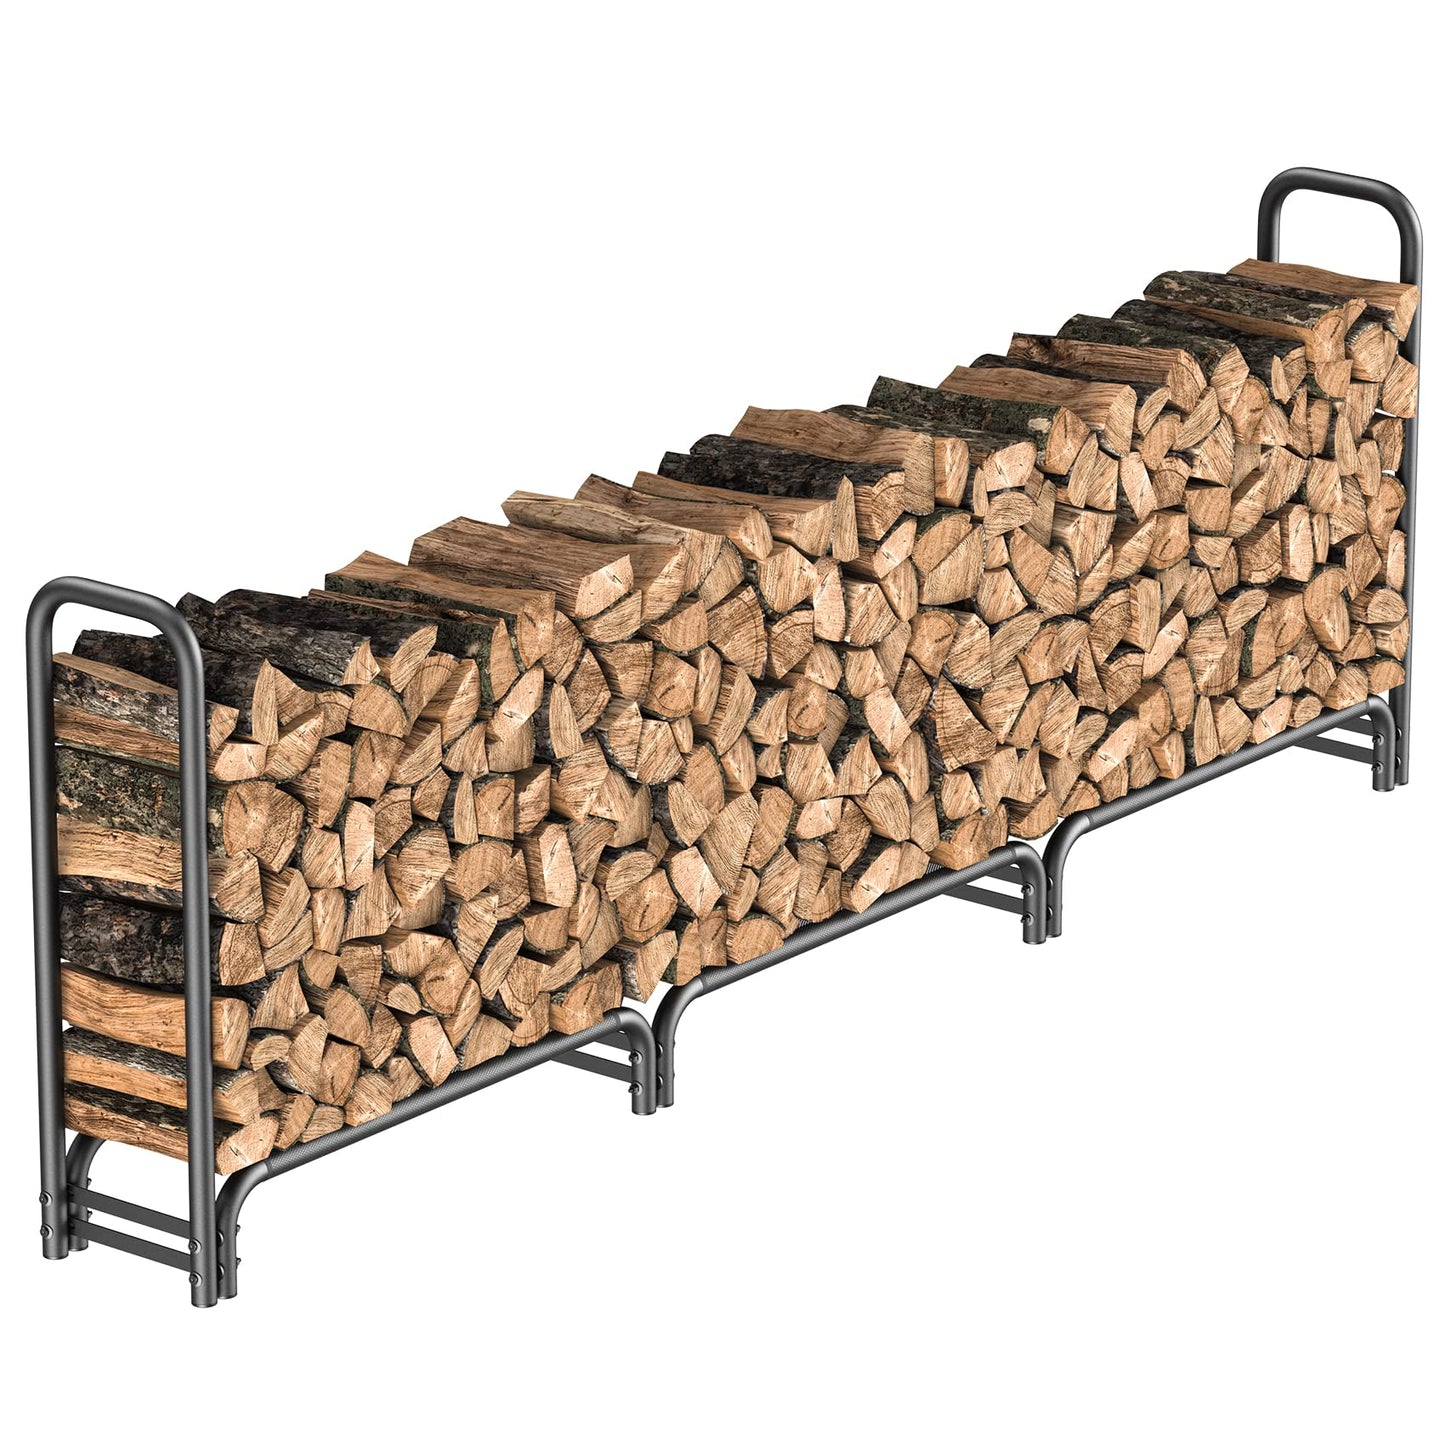 Mr IRONSTONE 12 ft Firewood Rack, Outdoor Wood Rack with Wood Base to Store Logs of Various Sizes, for Patio Deck Metal Log Holder Tubular Steel Wood Stacker Outdoor Tools